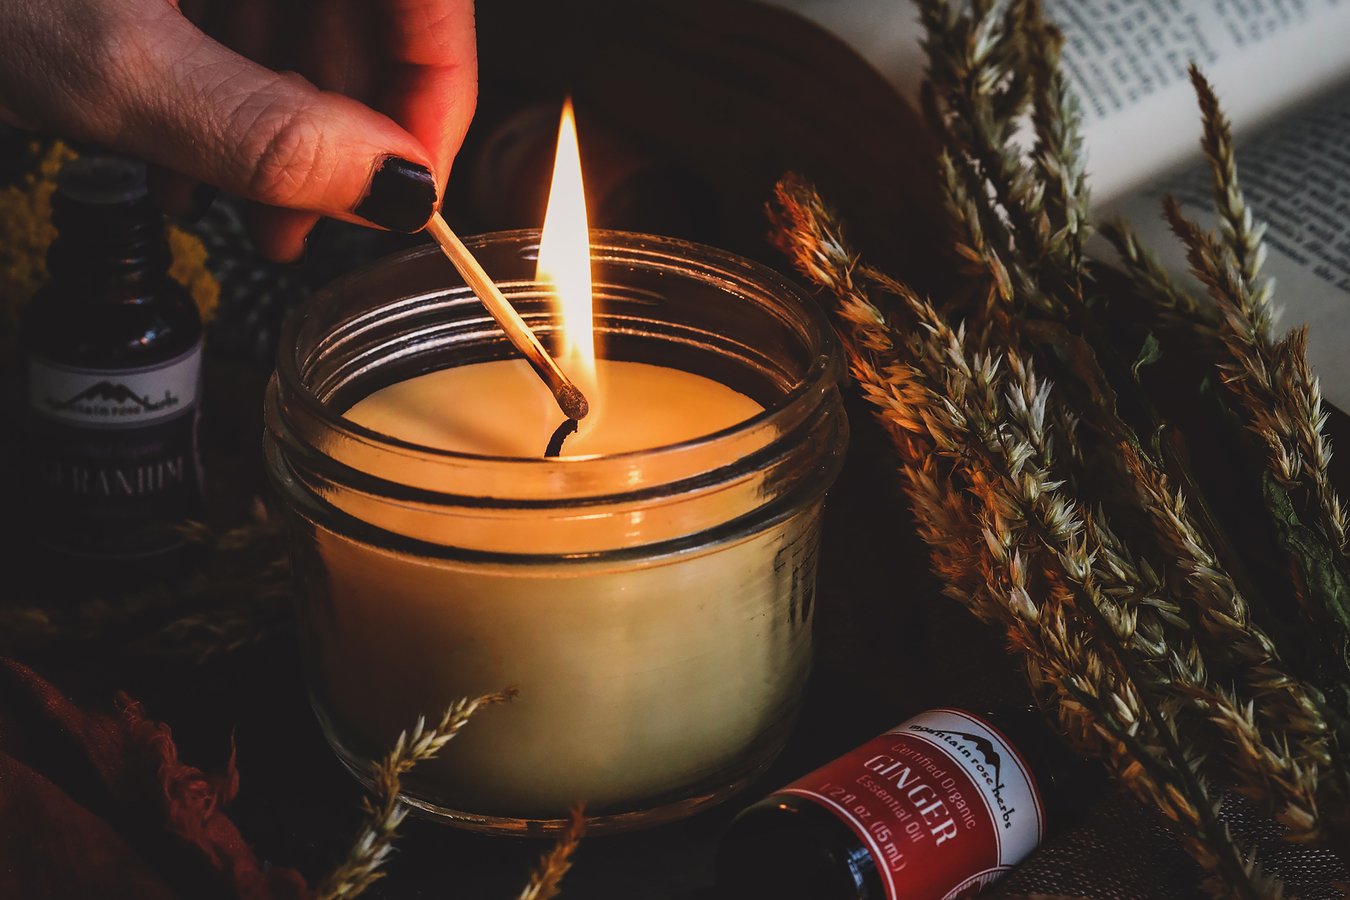 Essential Oil Candles: Why scent candles with essential oils?